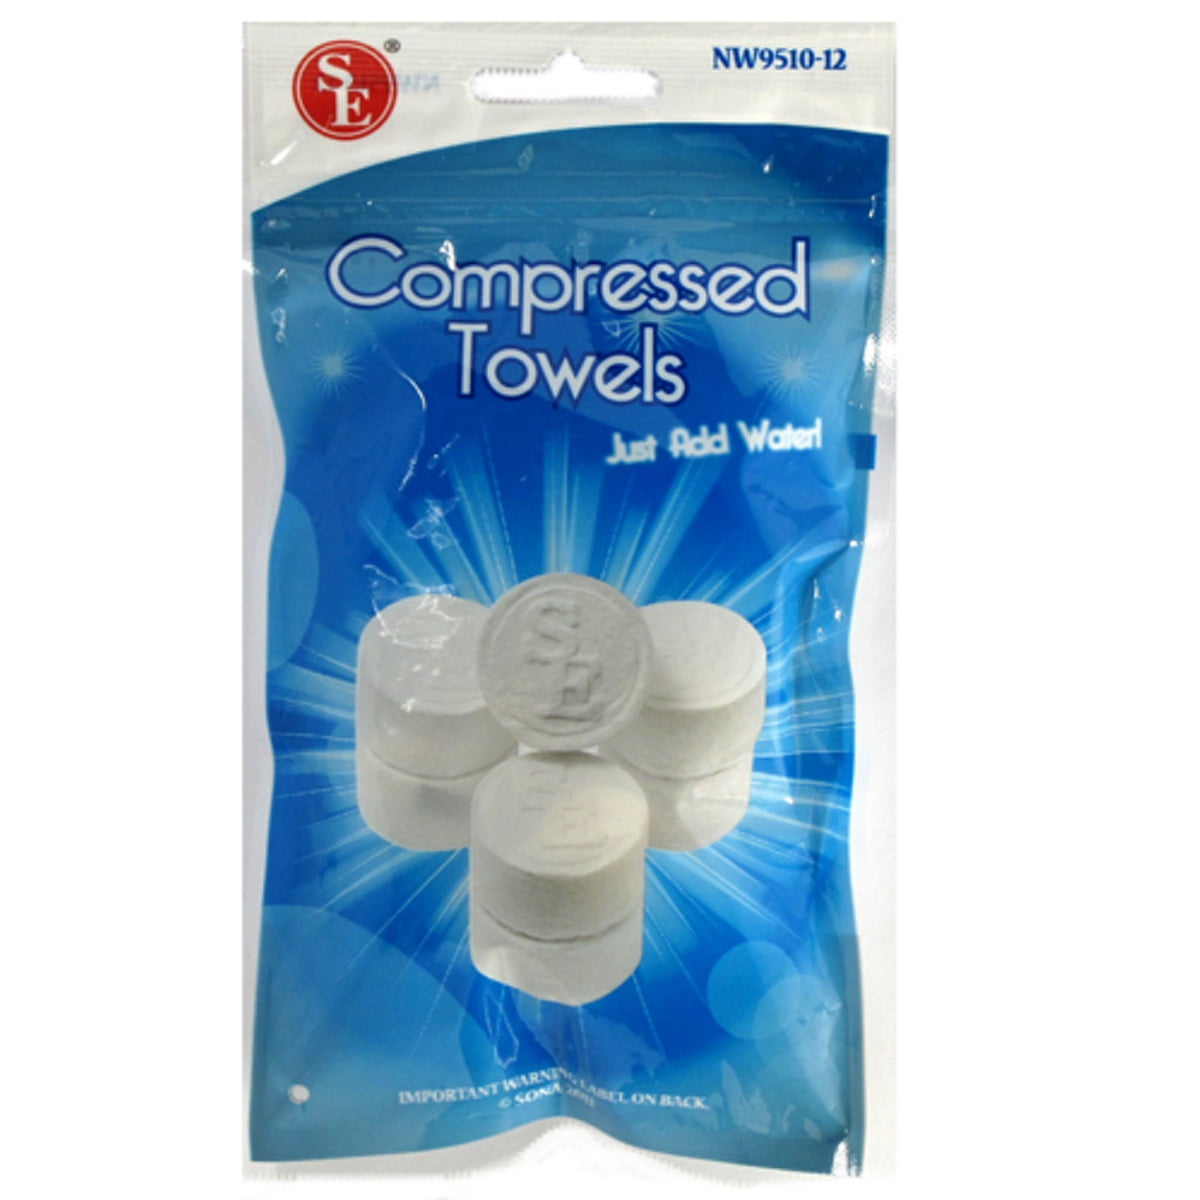 SE NW9510-12 Compressed Towels 12 Pack 9-1/2 x 10 Small White 9-1/2 x 10 Sona Enterprises